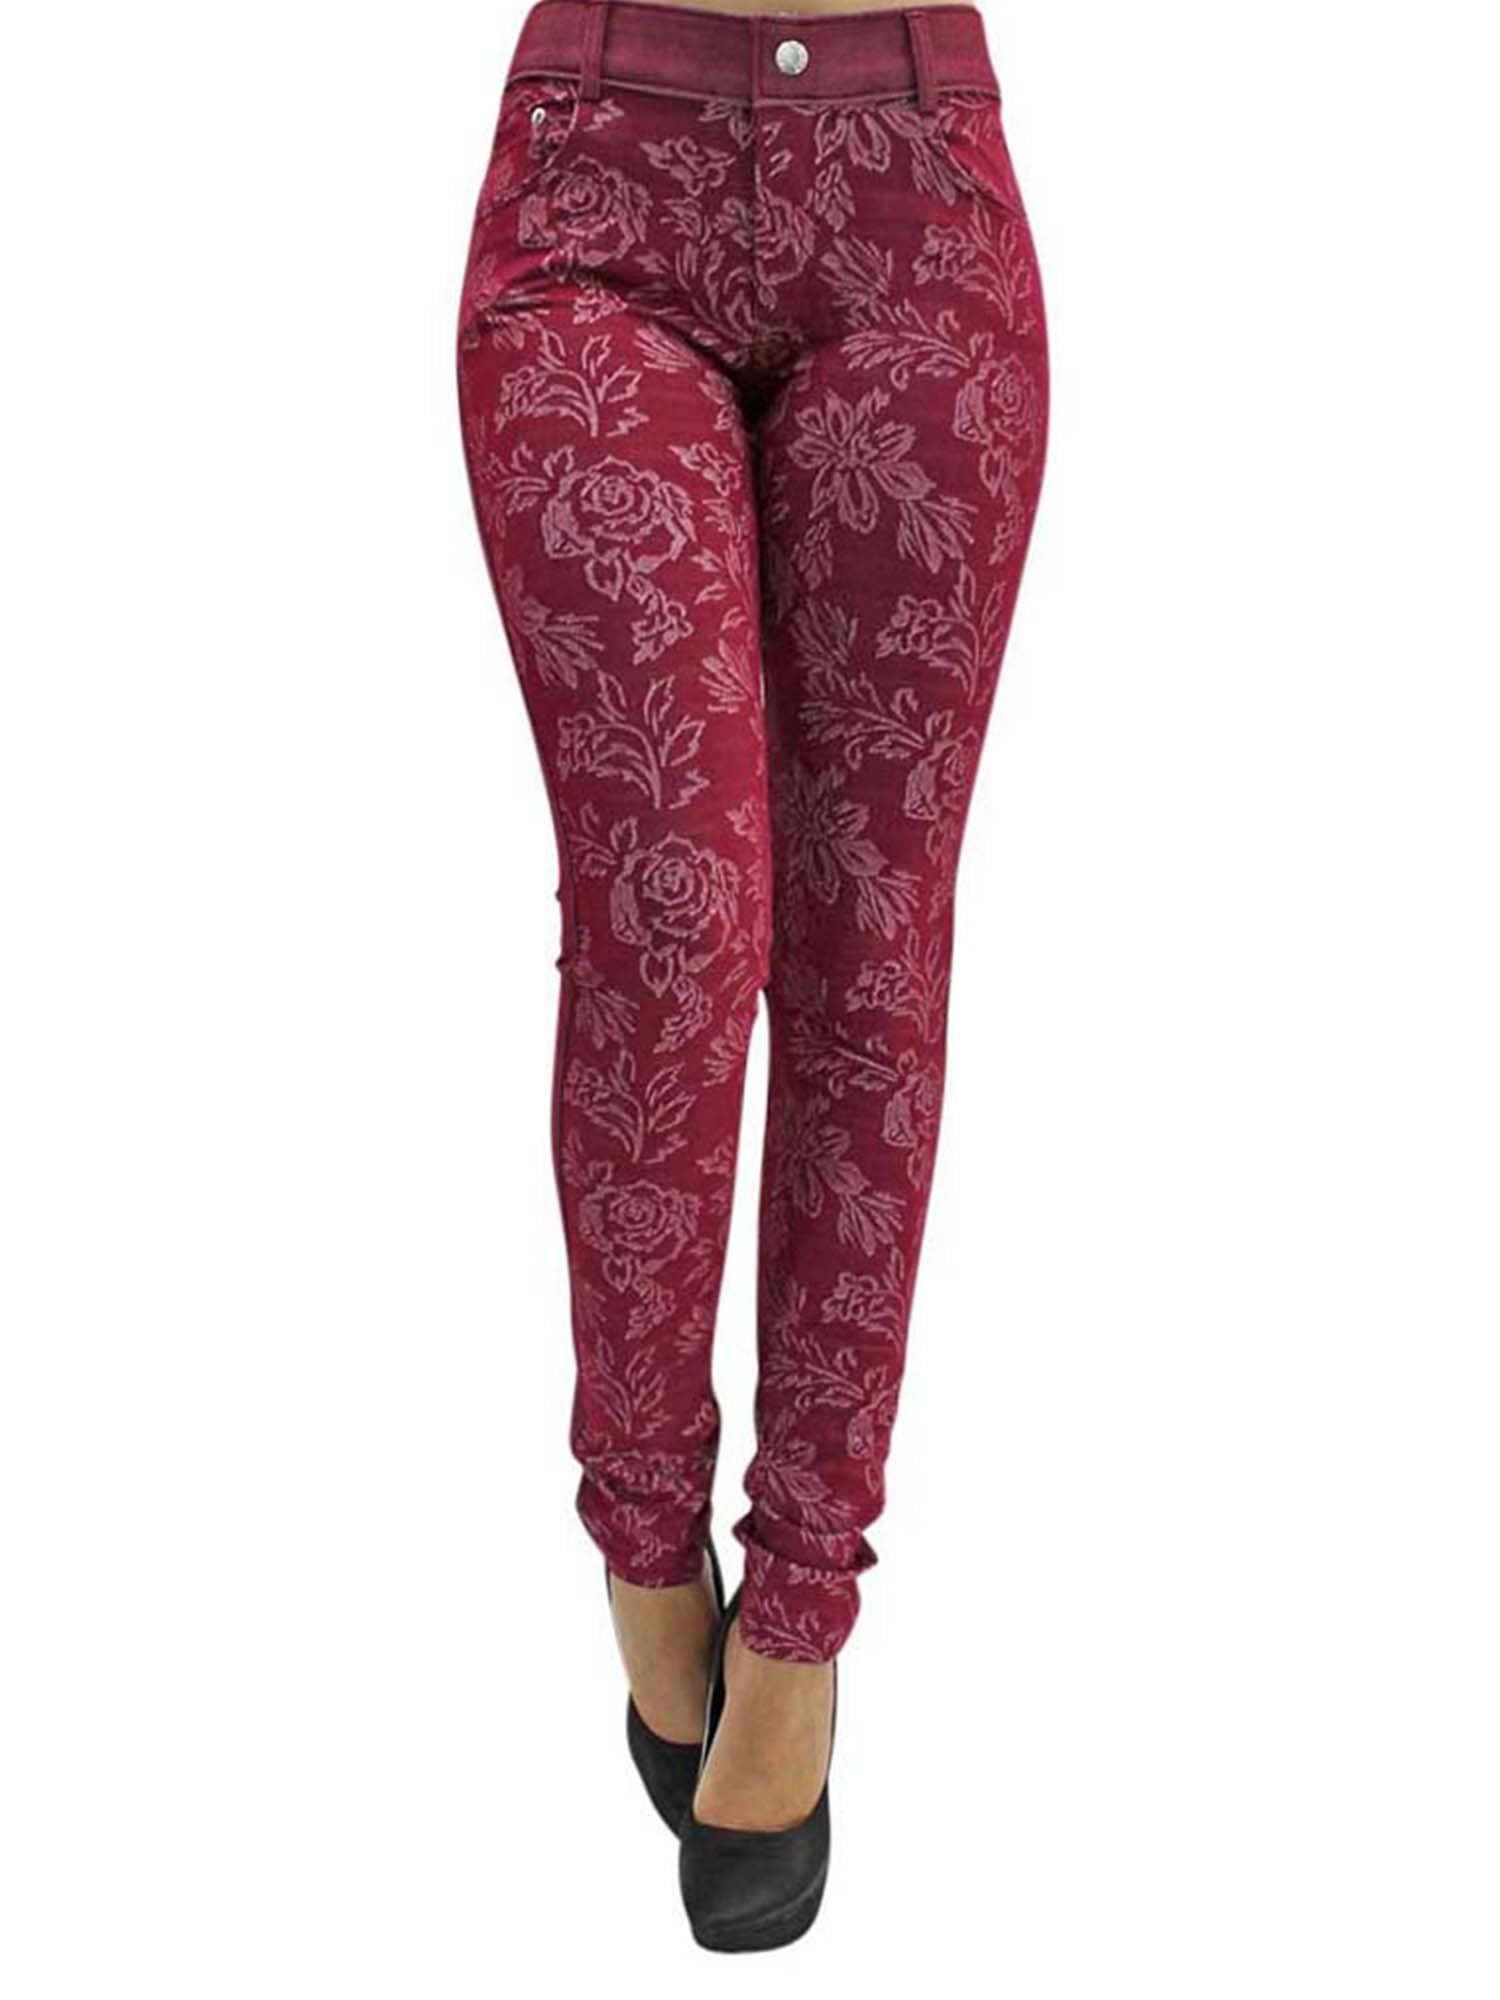 Red Floral Stretch Jeggings With Pockets Size Medium/Large